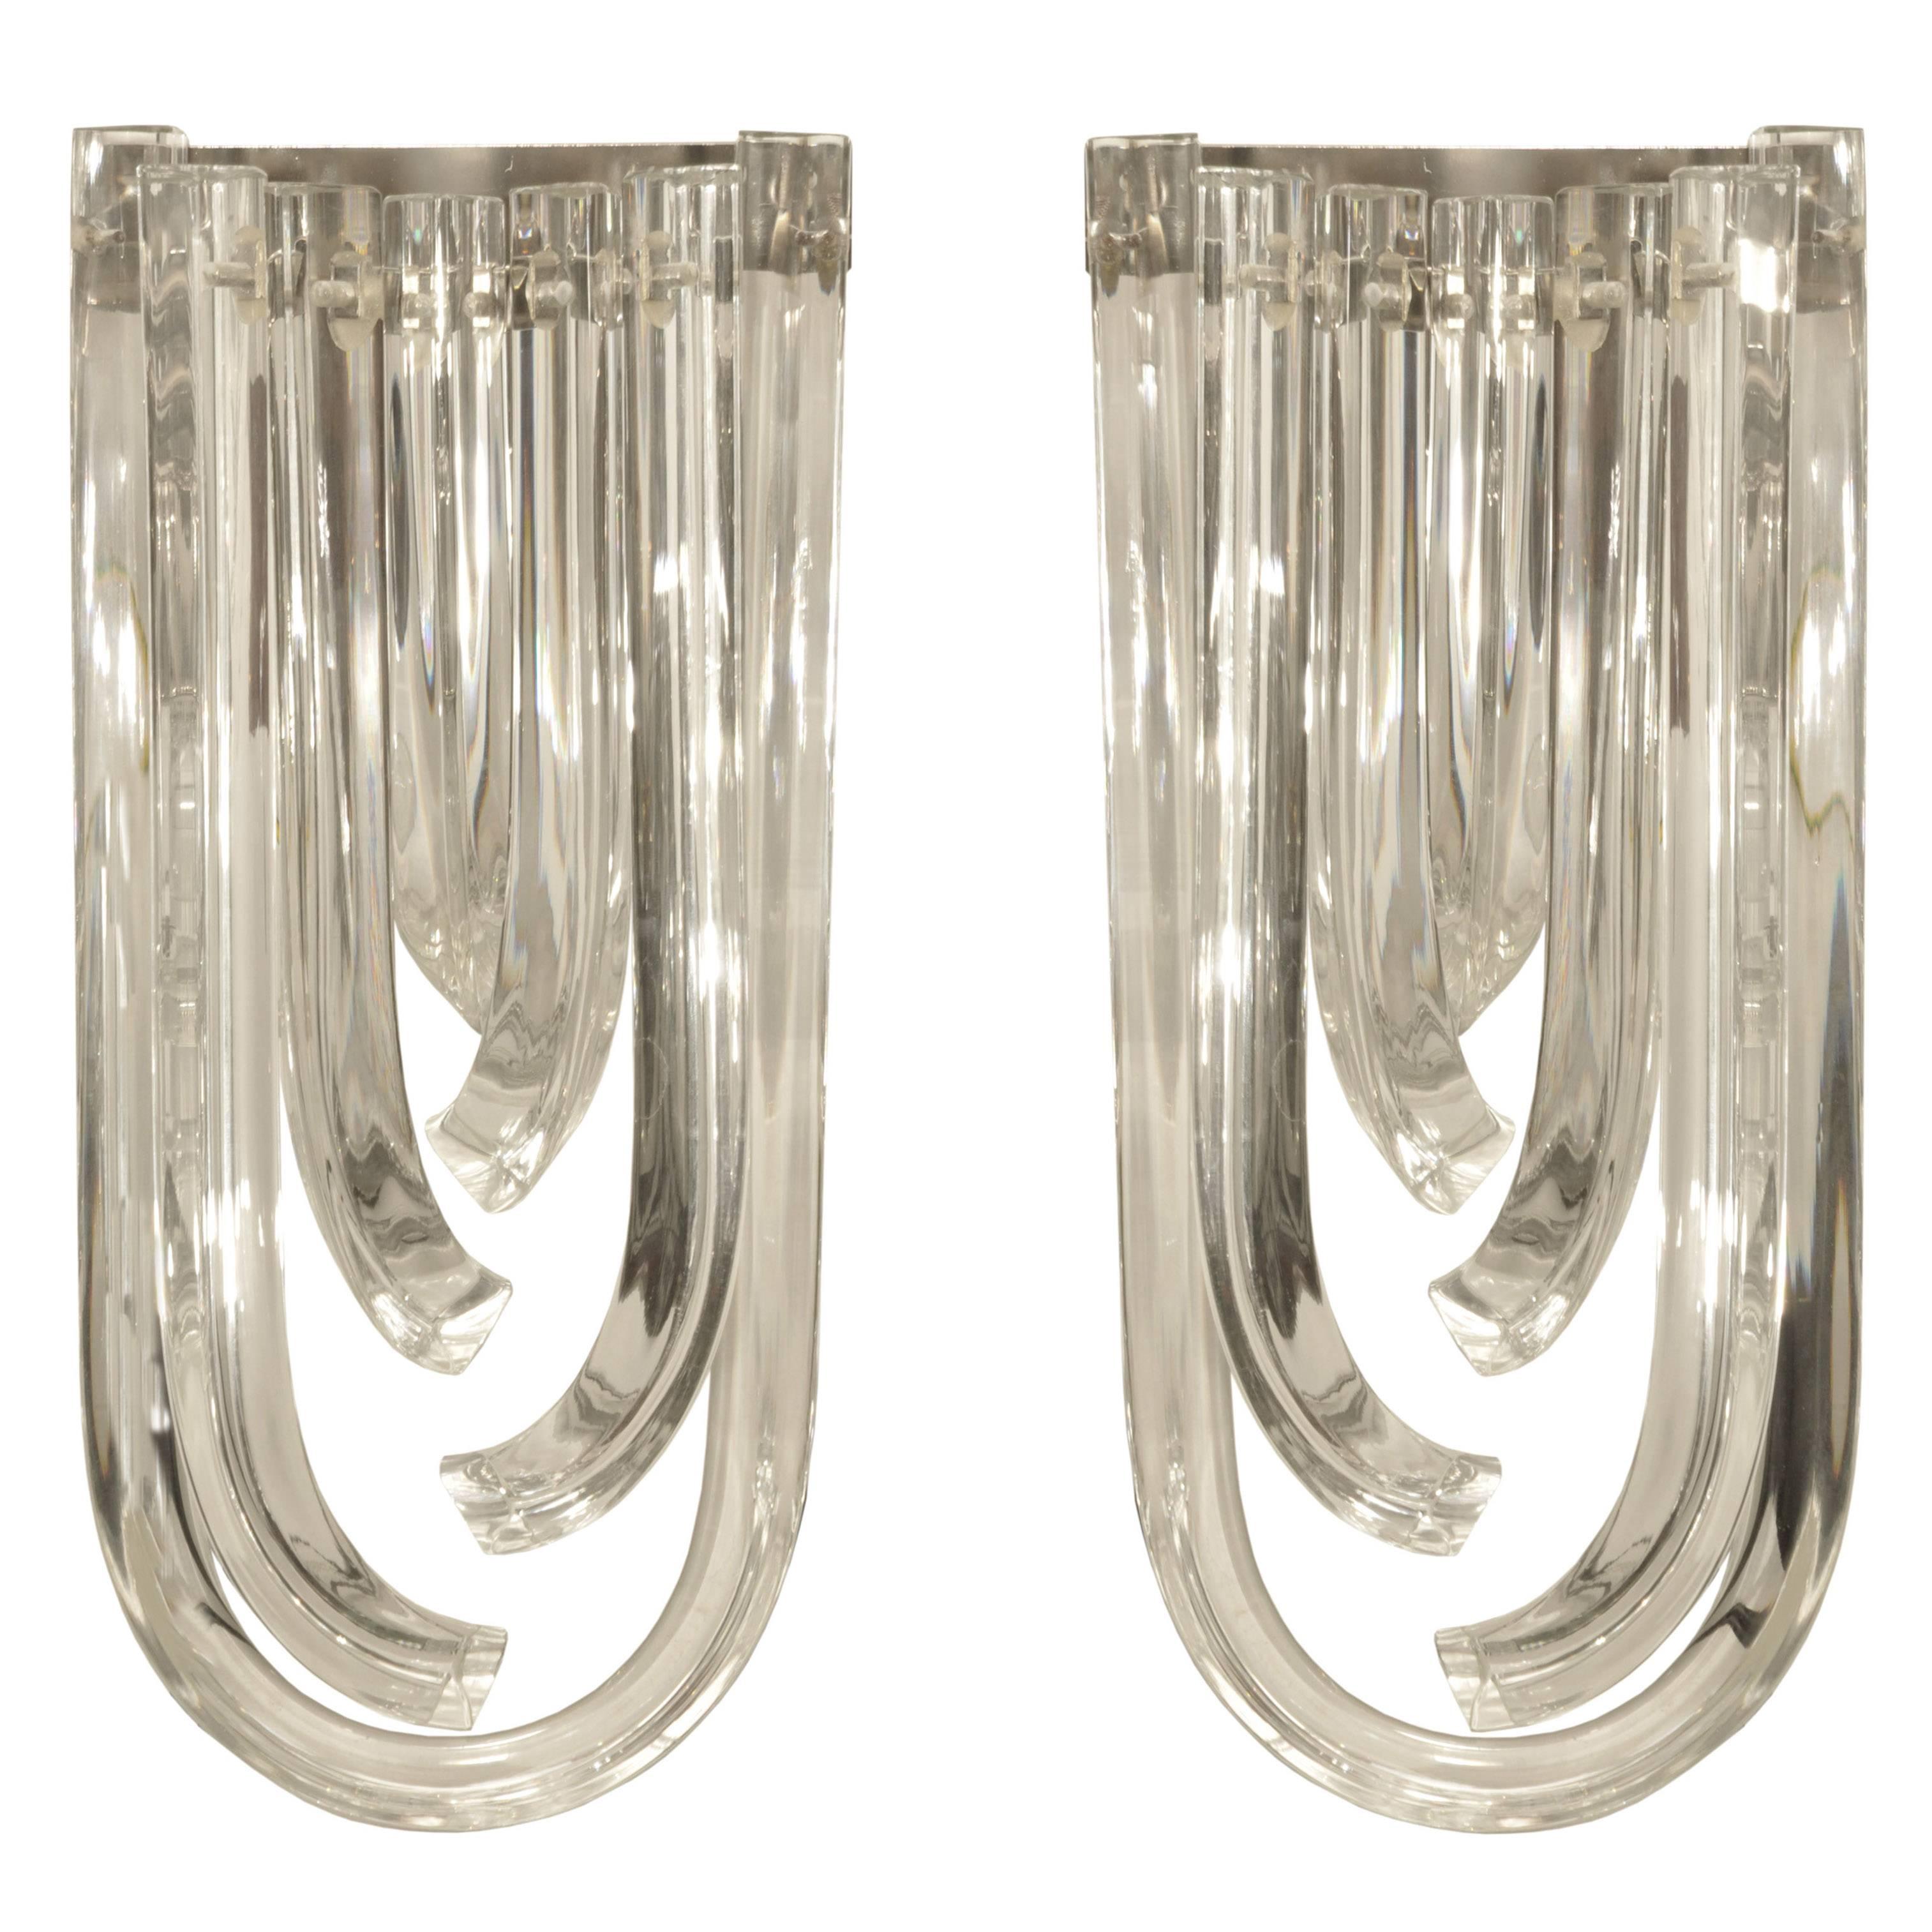 Pair of Murano Curved Crystal Sconces